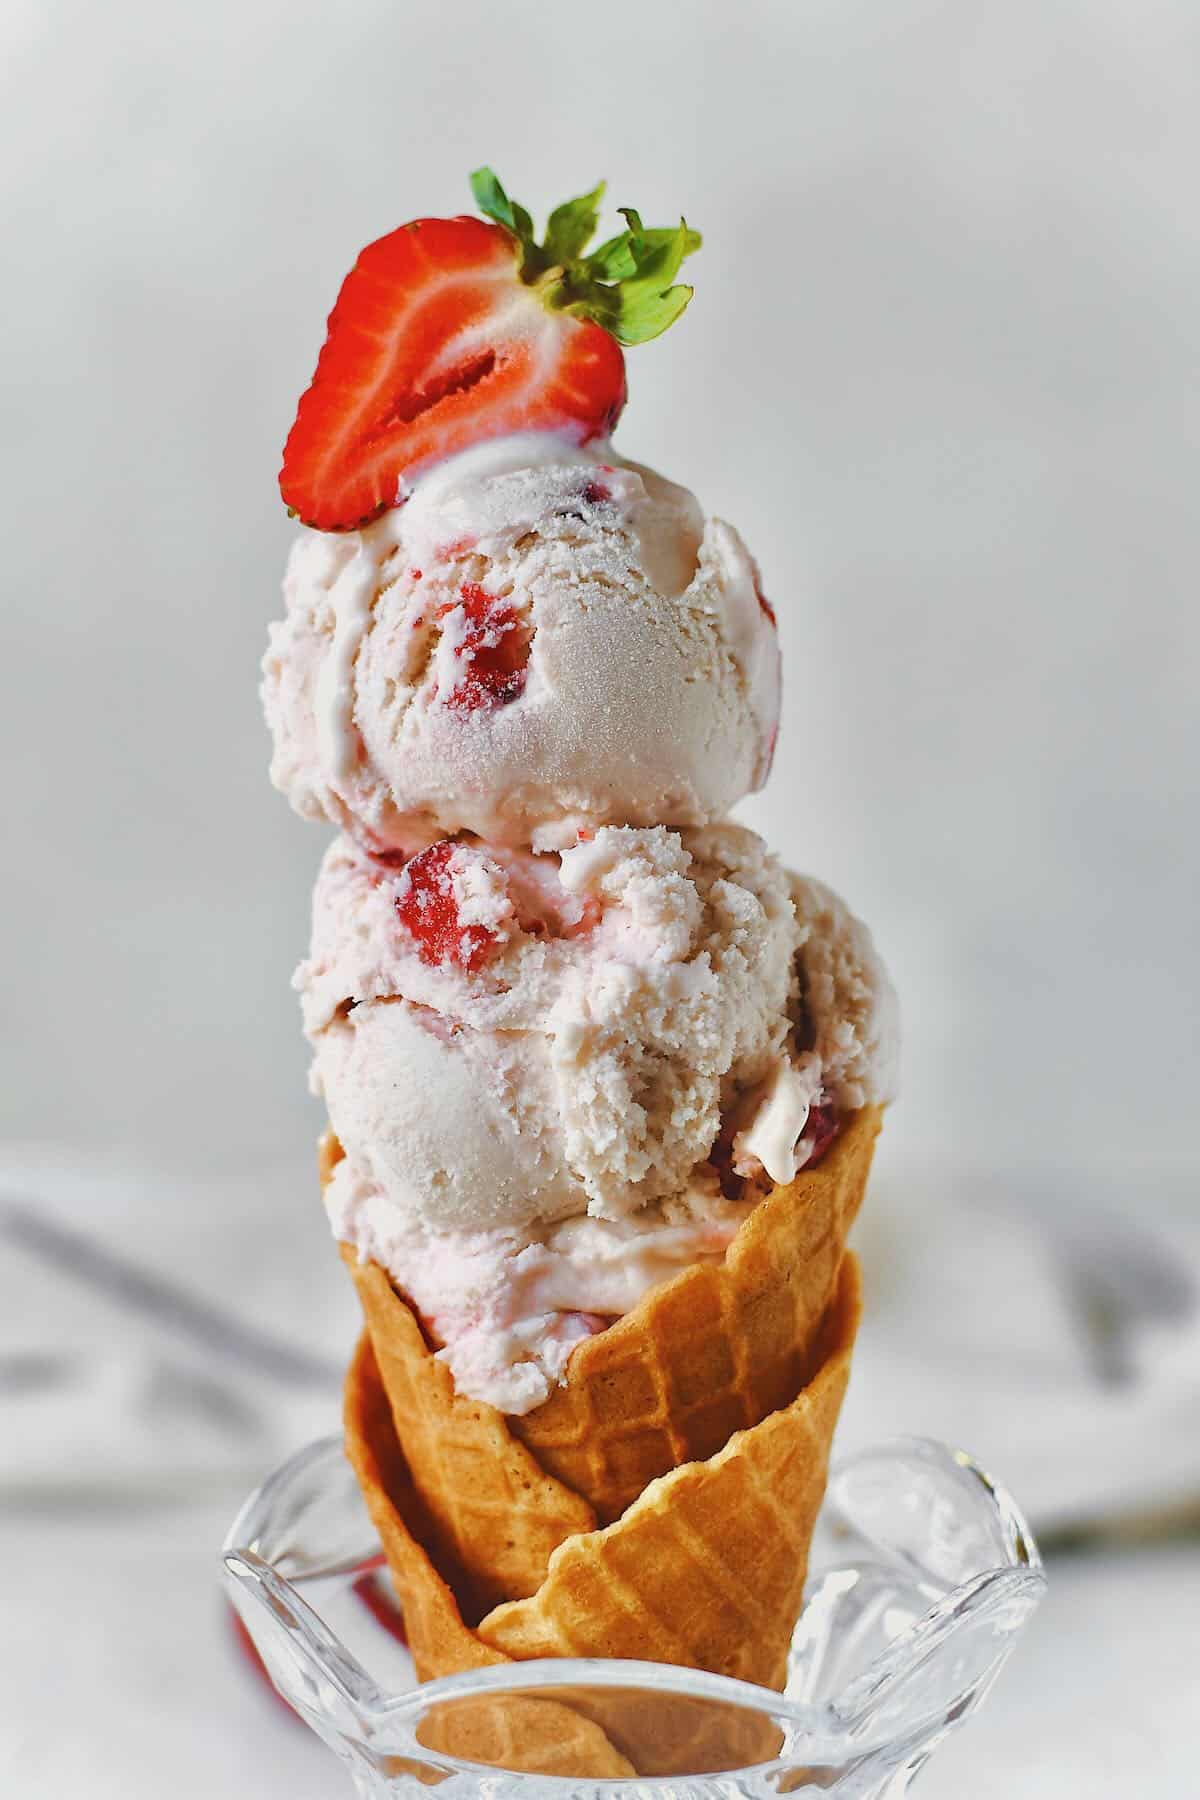 Strawberry Ice Cream served in a cone standing in a sunday dish.